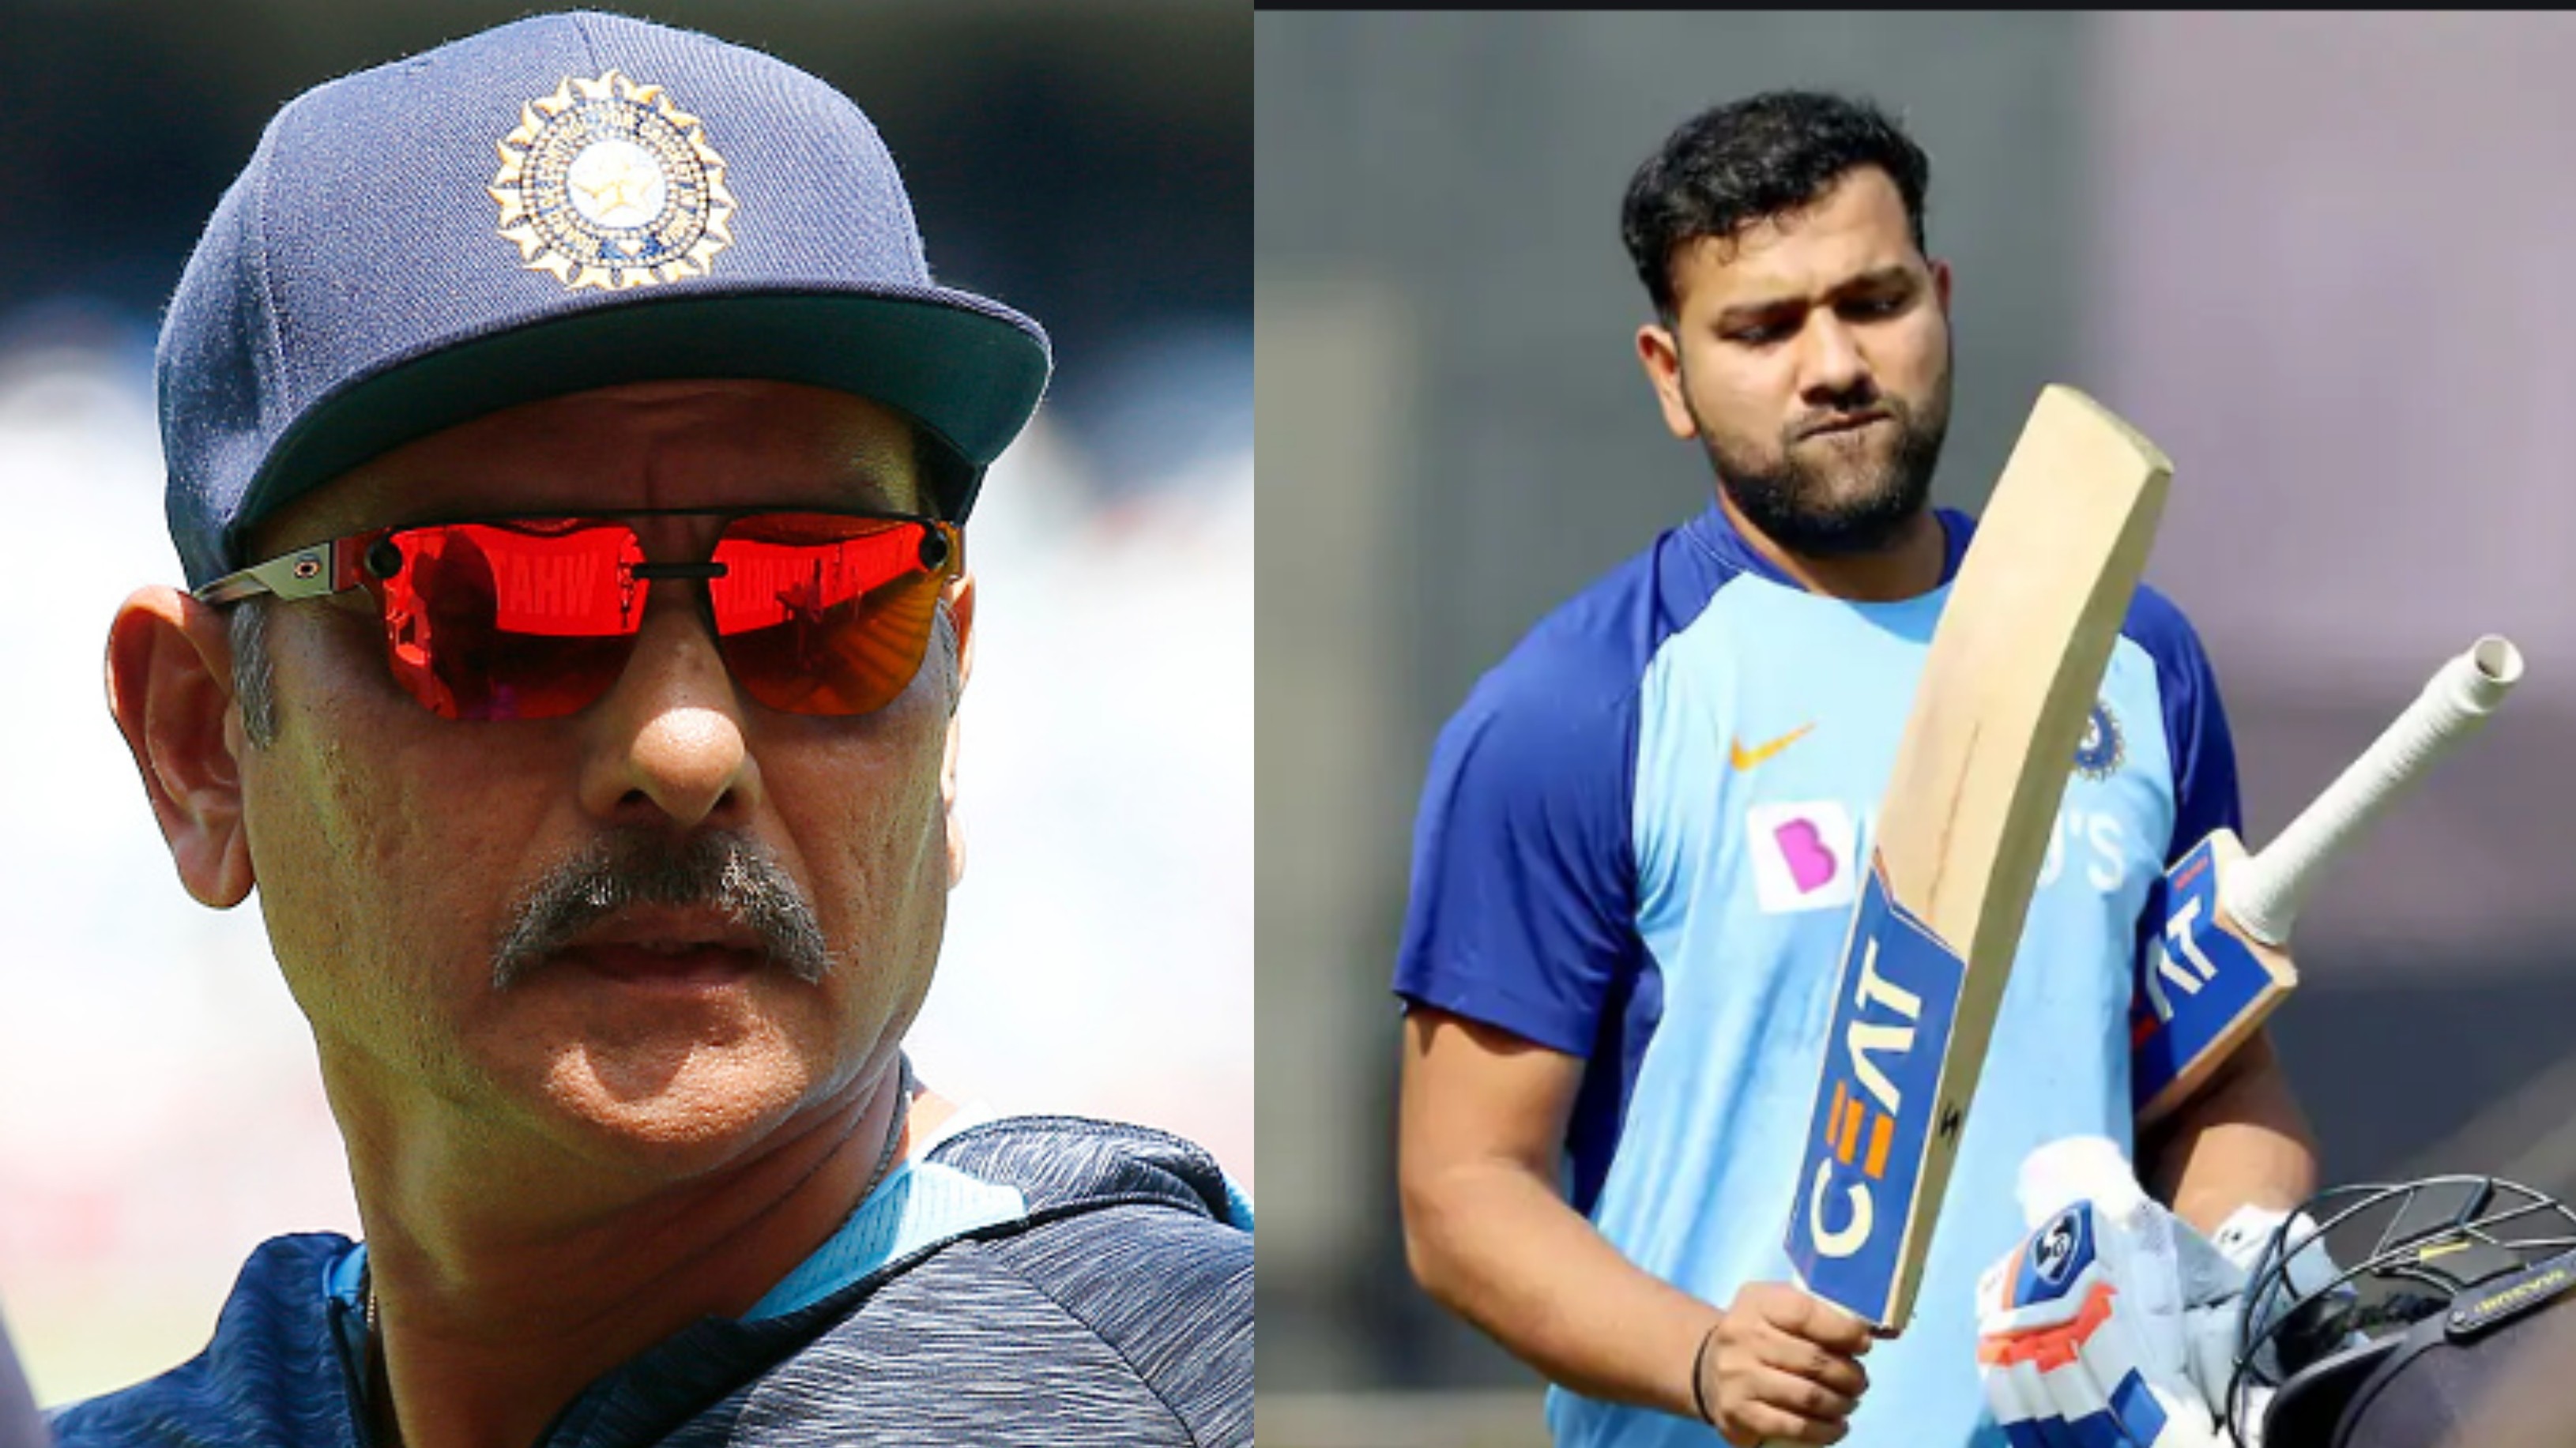 AUS v IND 2020-21: Ravi Shastri confirms Rohit Sharma's inclusion in Indian squad on Wednesday